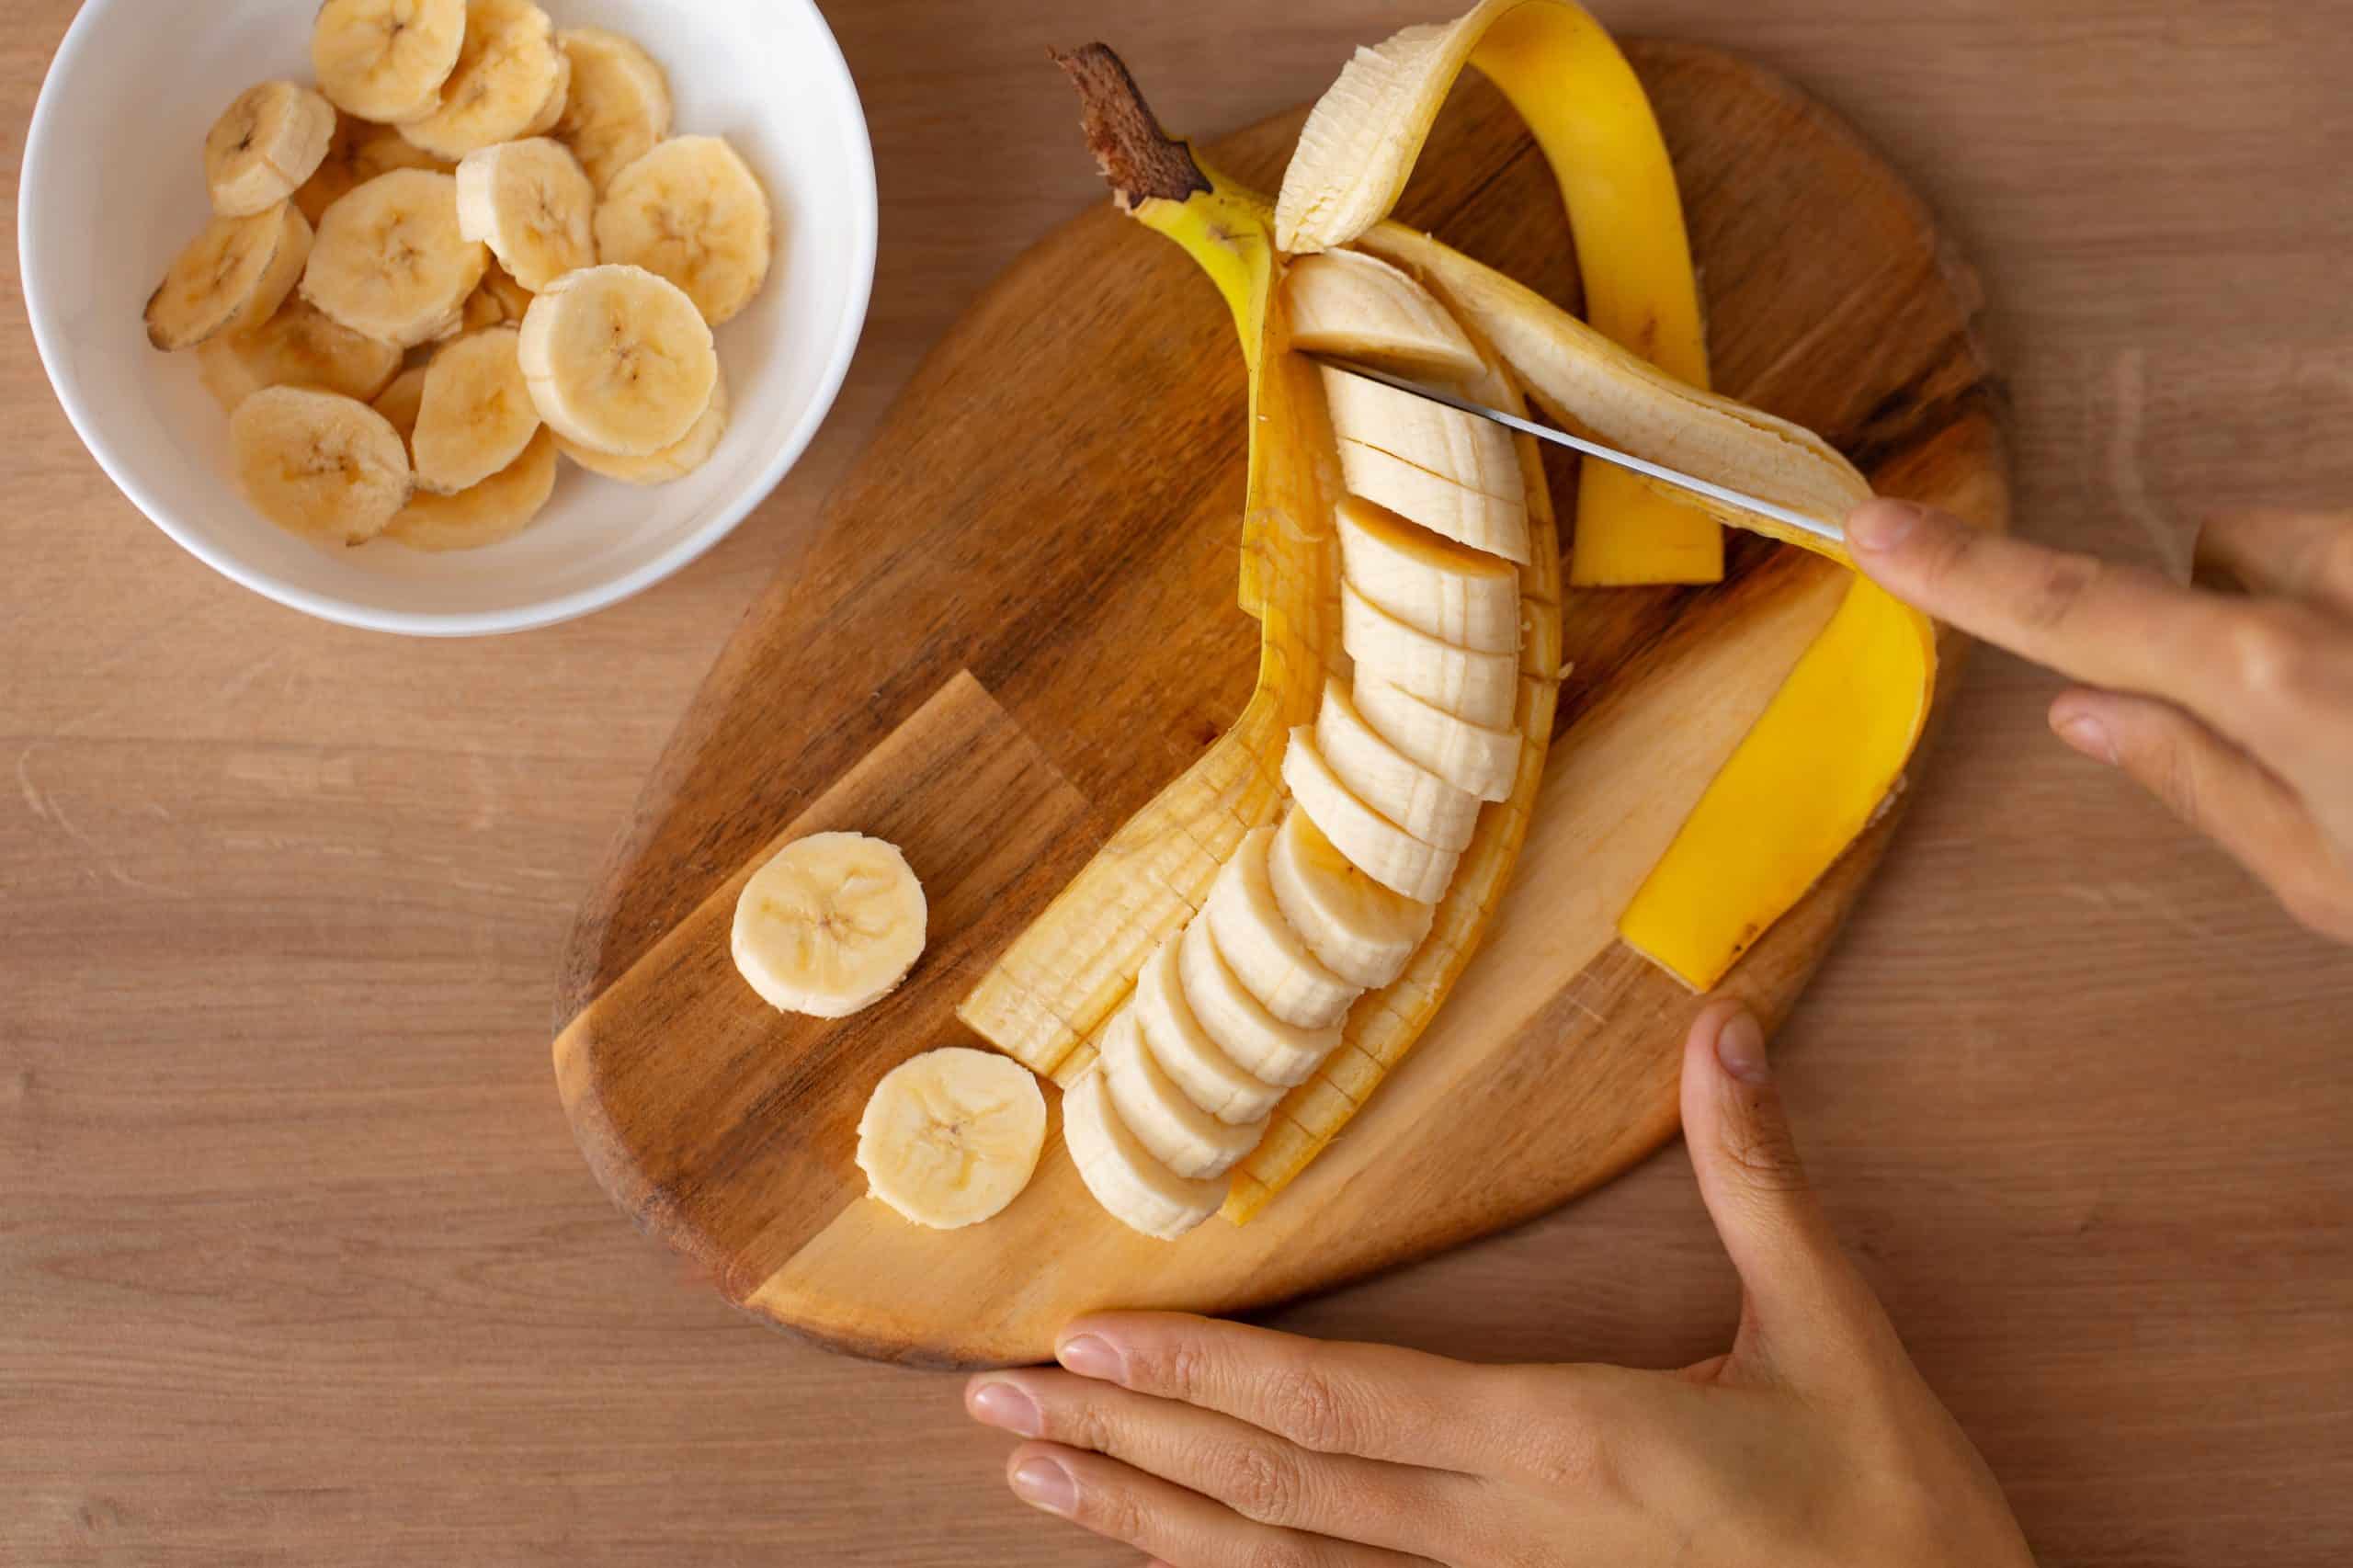 Bananas are a Bountiful Source of Benefits for Well-Being